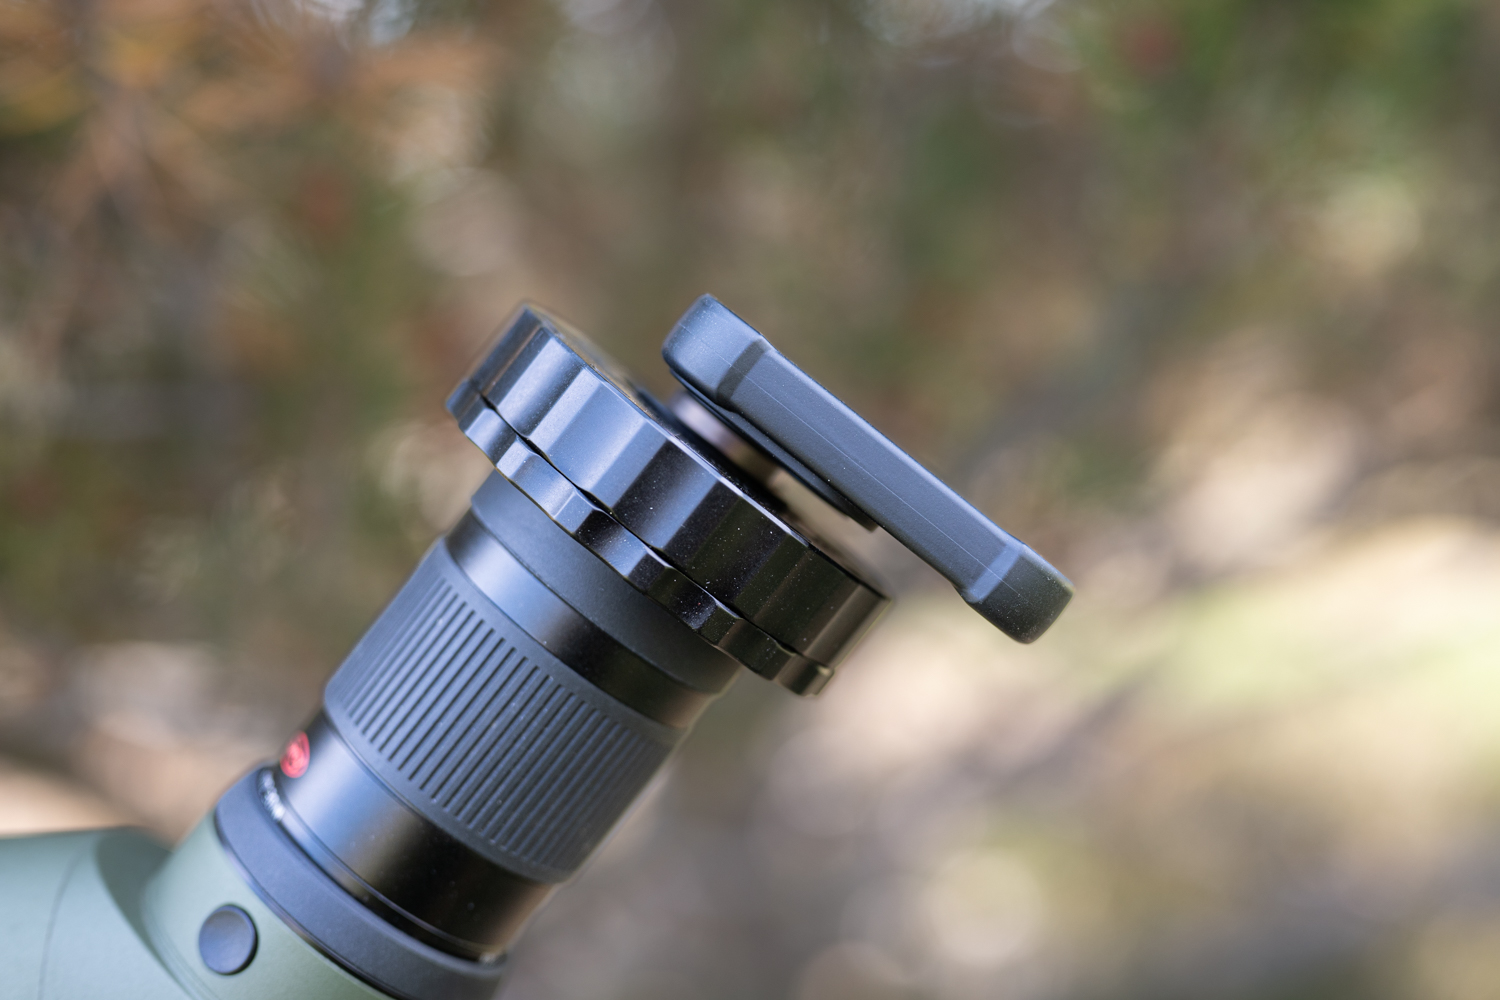 A phone digiscoping adapter lines up the phone’s camera lens to the eyepiece.